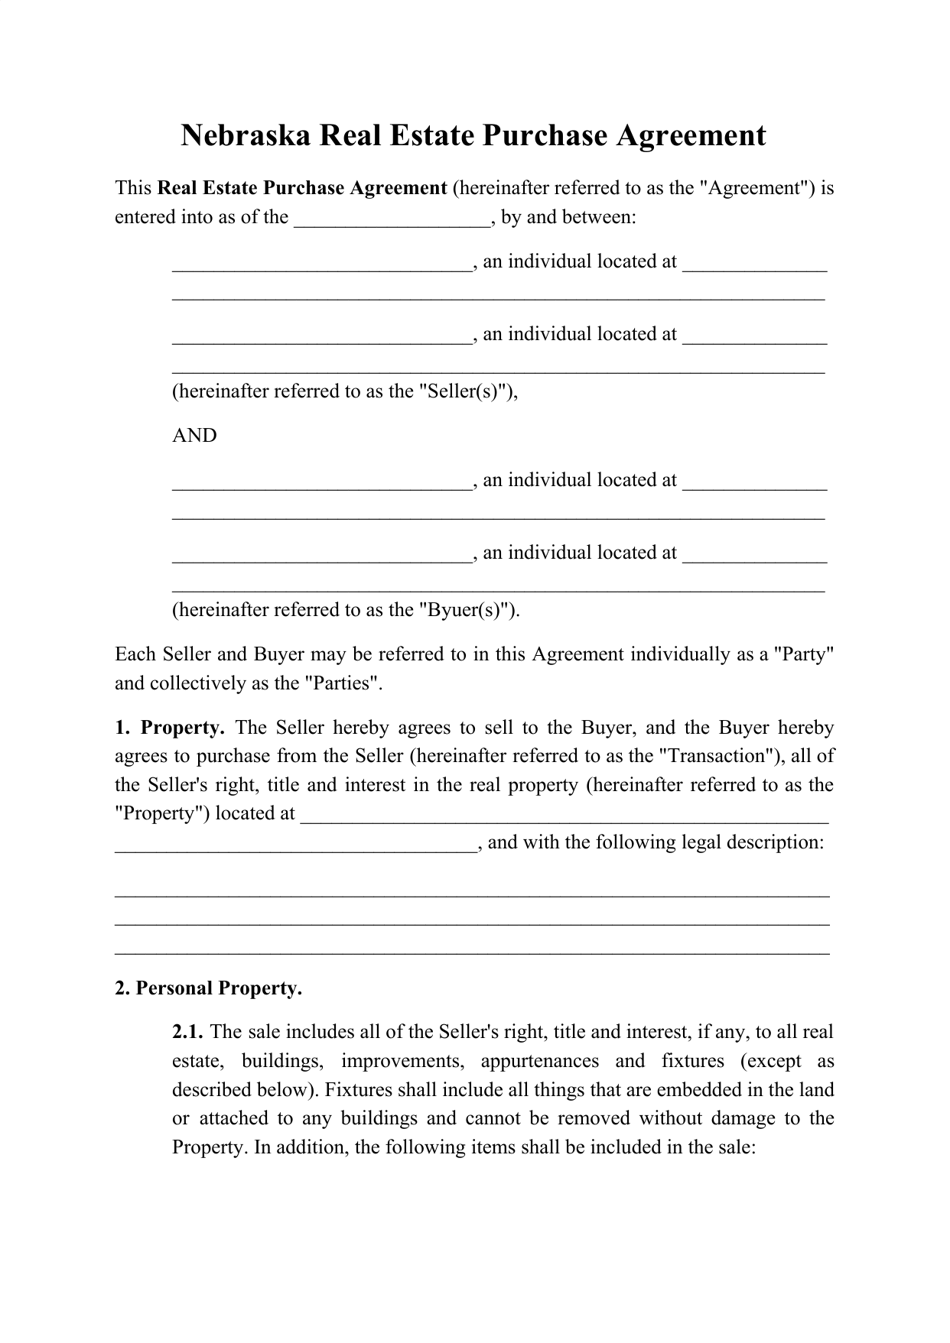 Nebraska Real Estate Purchase Agreement Template Fill Out Sign